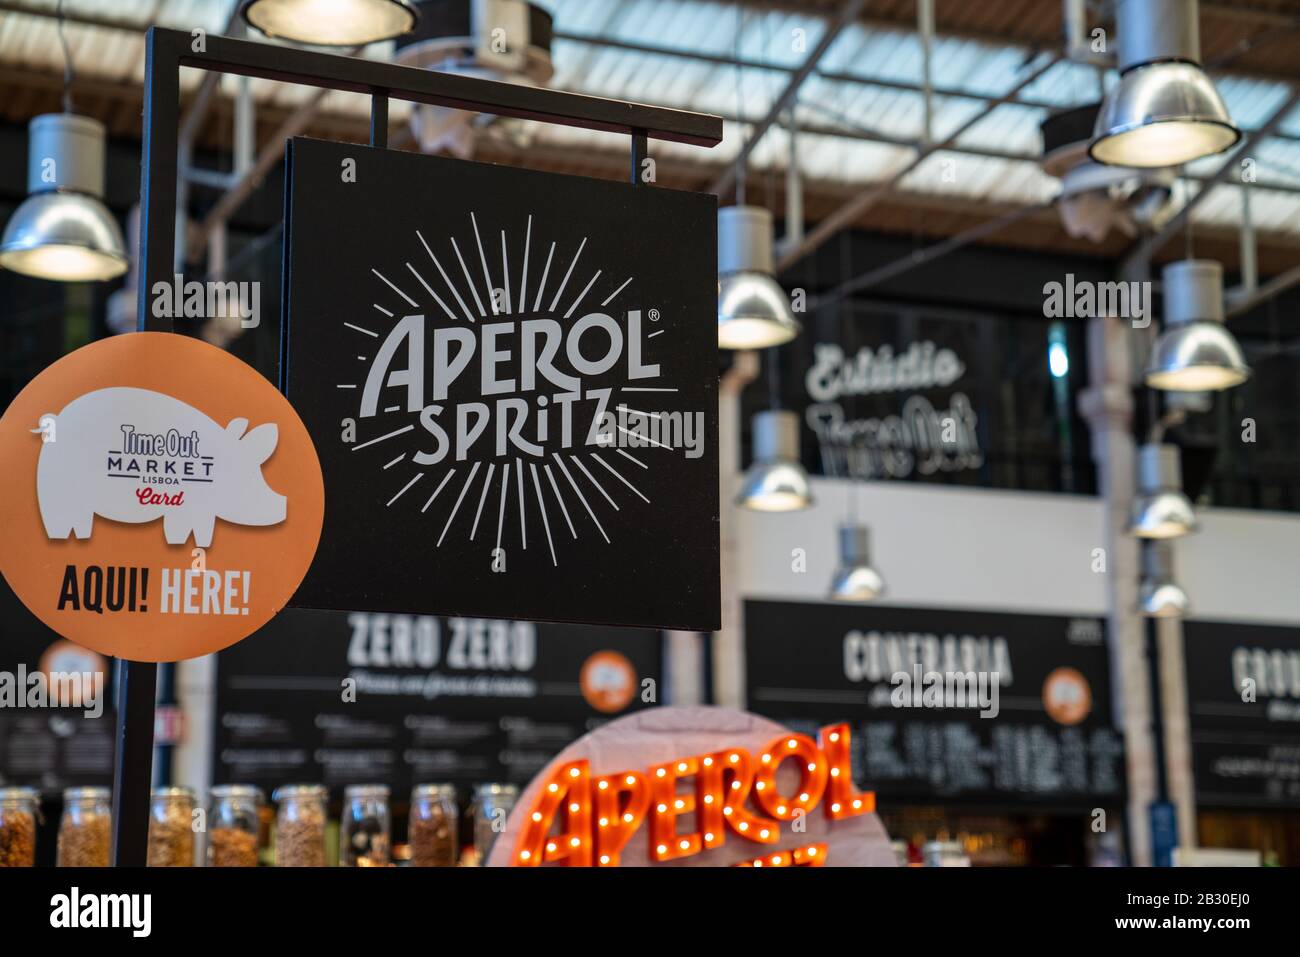 Aperol Spritz logo at specialty bar at Time Out Market Lisbon Stock Photo -  Alamy